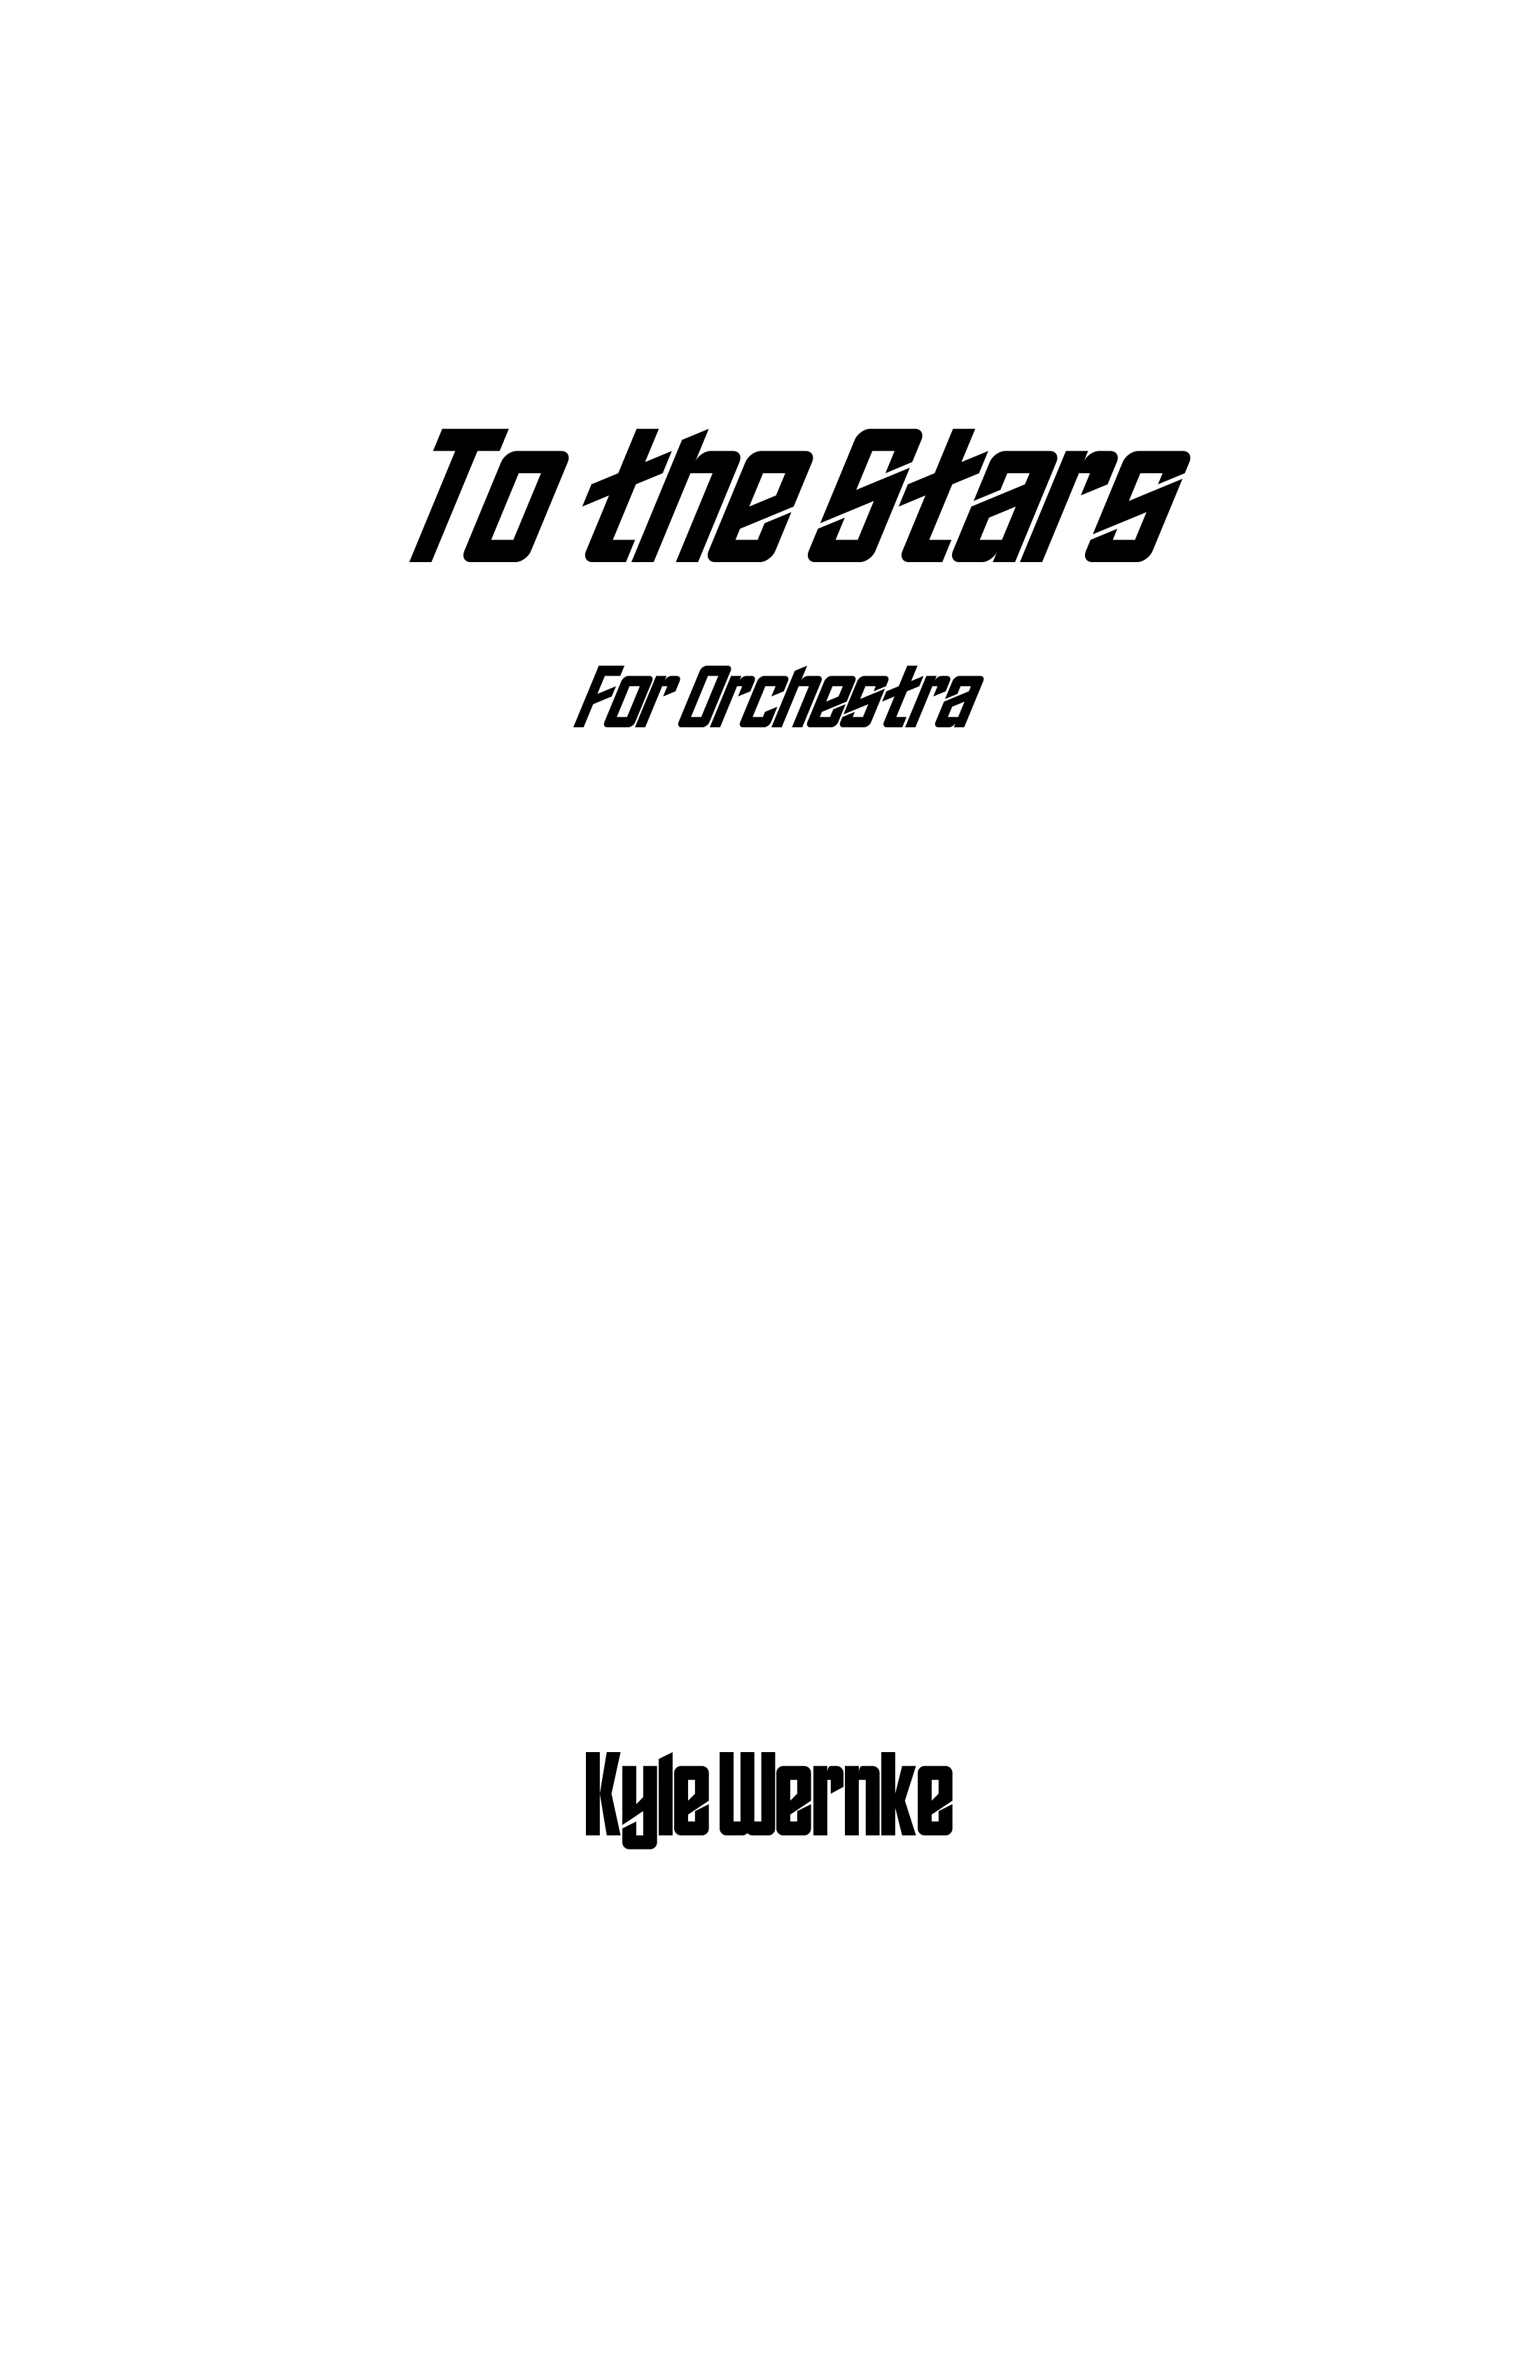 To The Stars (orchestra)